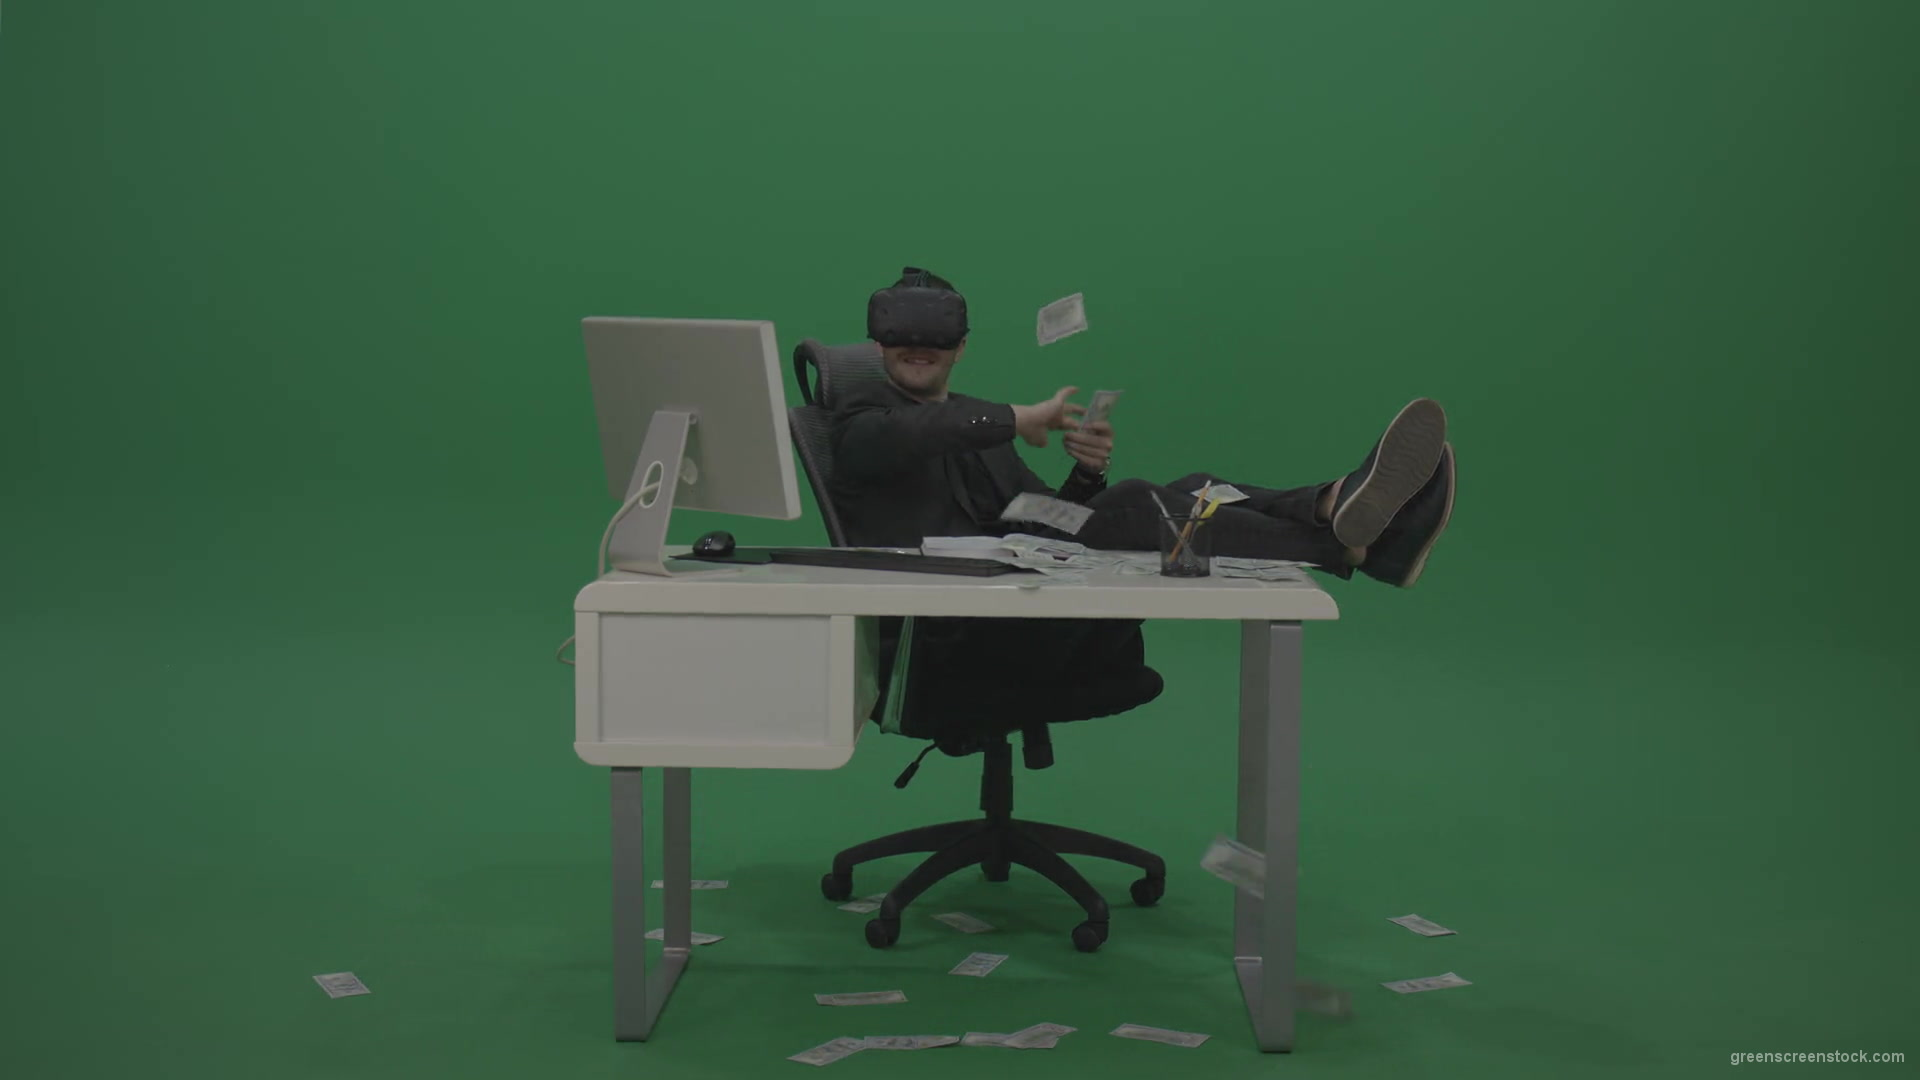 Young_Cool_Handsome_Happily_Laughing_Businessman_Sitting_At_Office_Table_Making_Money_Hasla_On_Green_Screen_Wall_Background-1920_008 Green Screen Stock